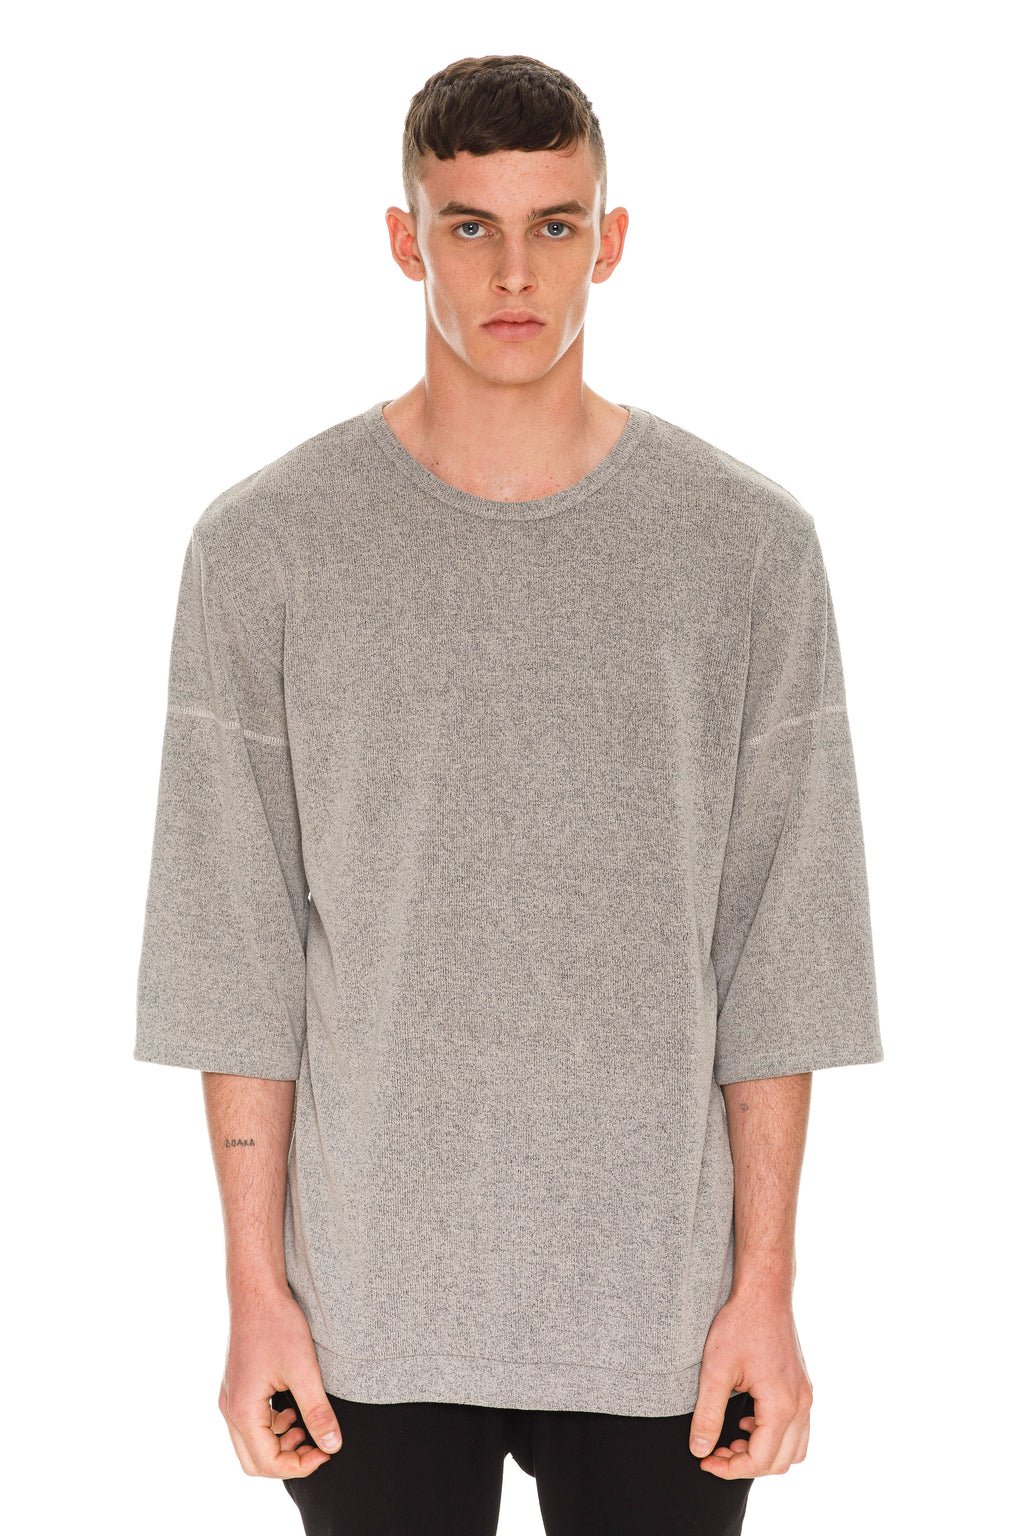 Grey Oversized Short Sleeve With Three Quarter Sleeves - Front View